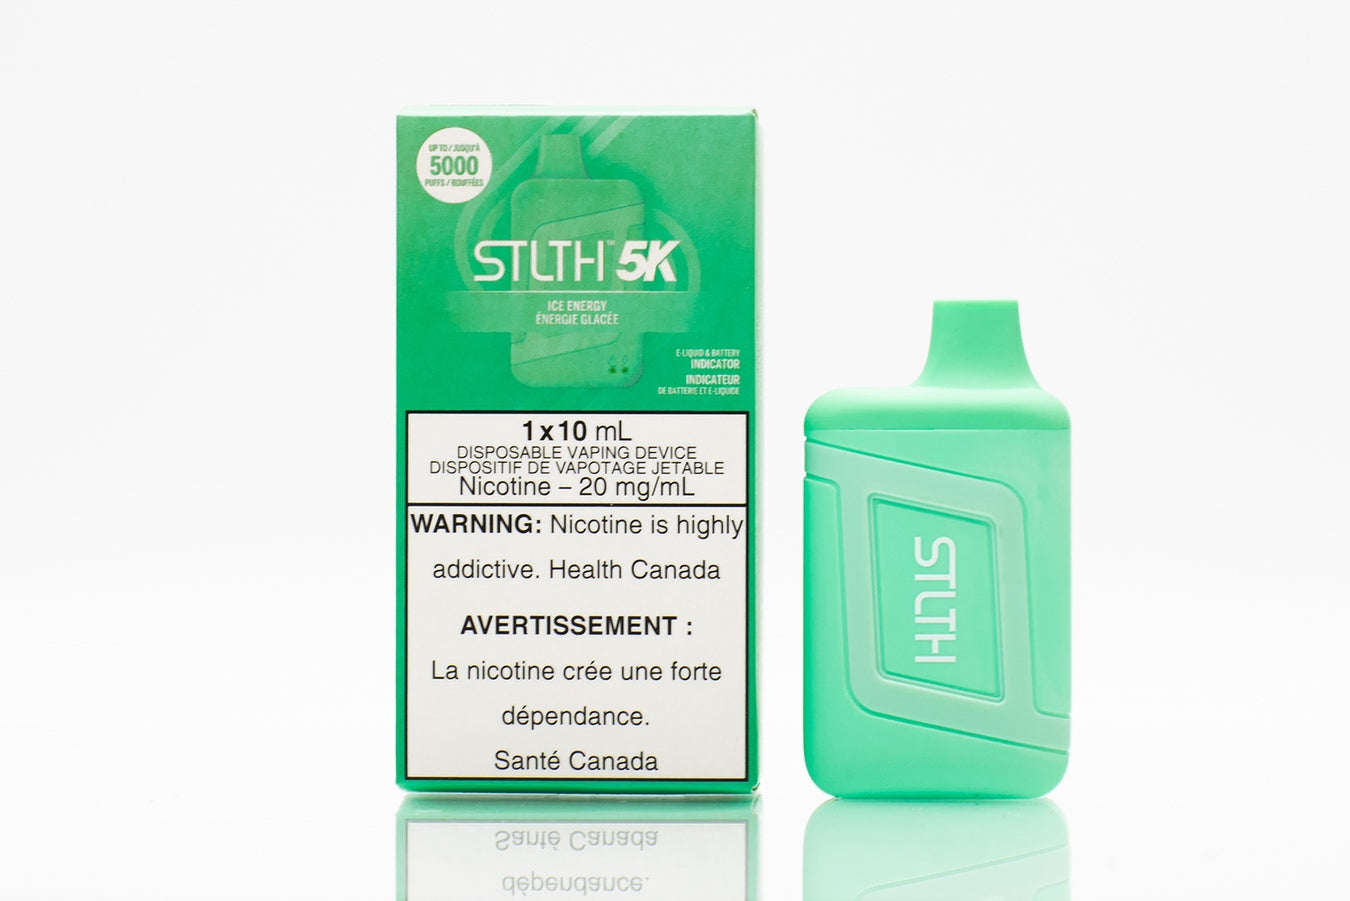 STLTH 5K disposable vape device next to packaging